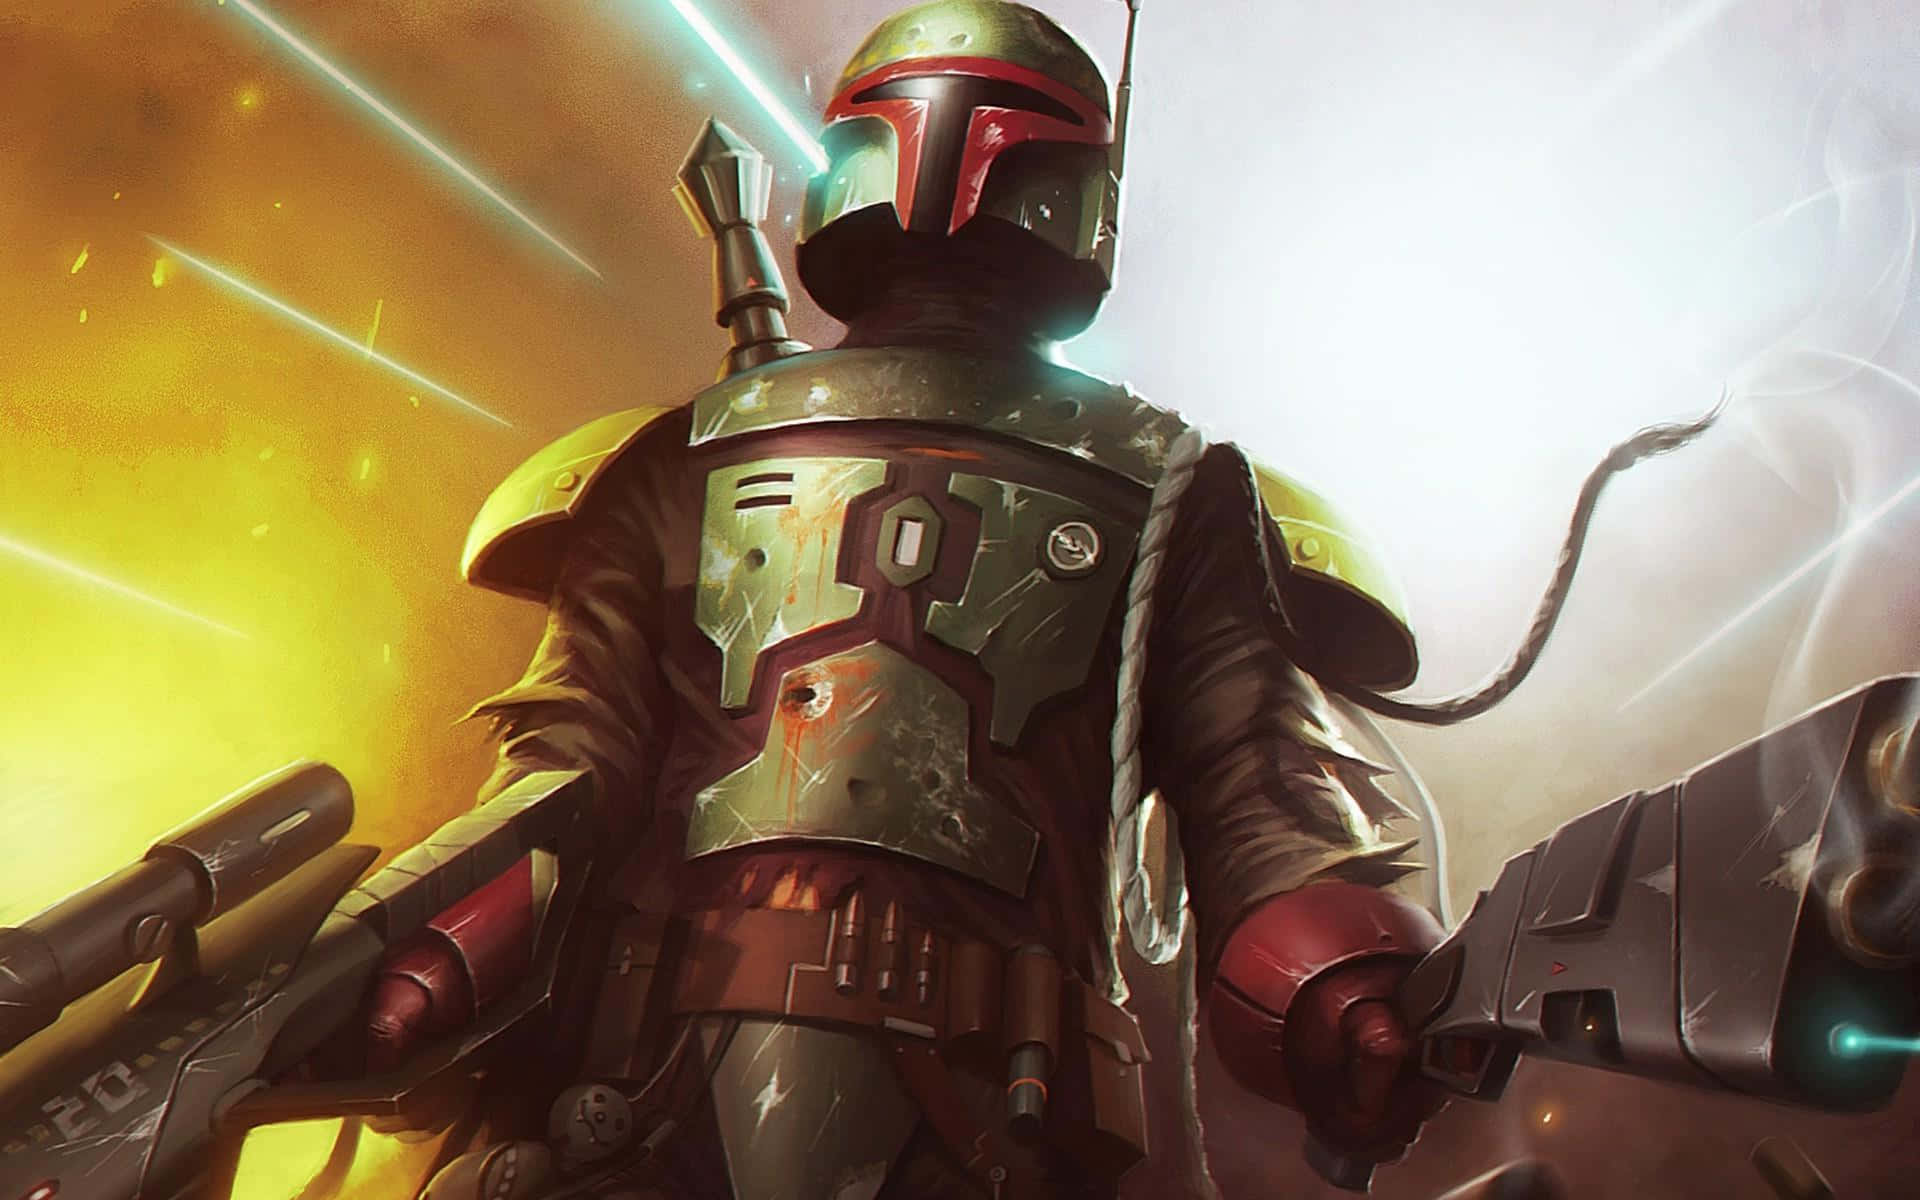 Boba Fett stands tall and ready for action